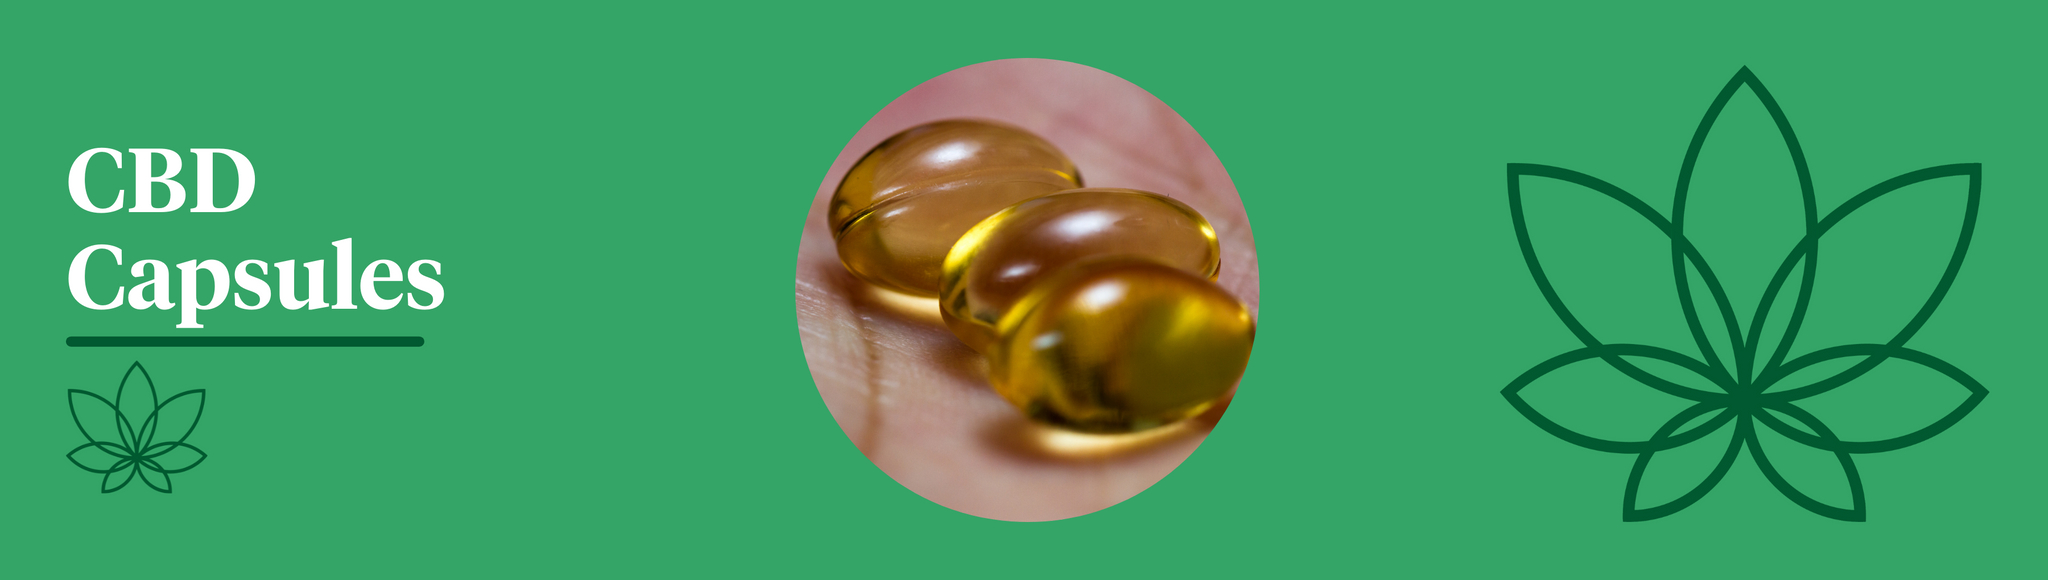 A green background with the Supreme CBD logo to the right with a large image in the centre showcasing a person's hand holding 3 CBD capsules. 